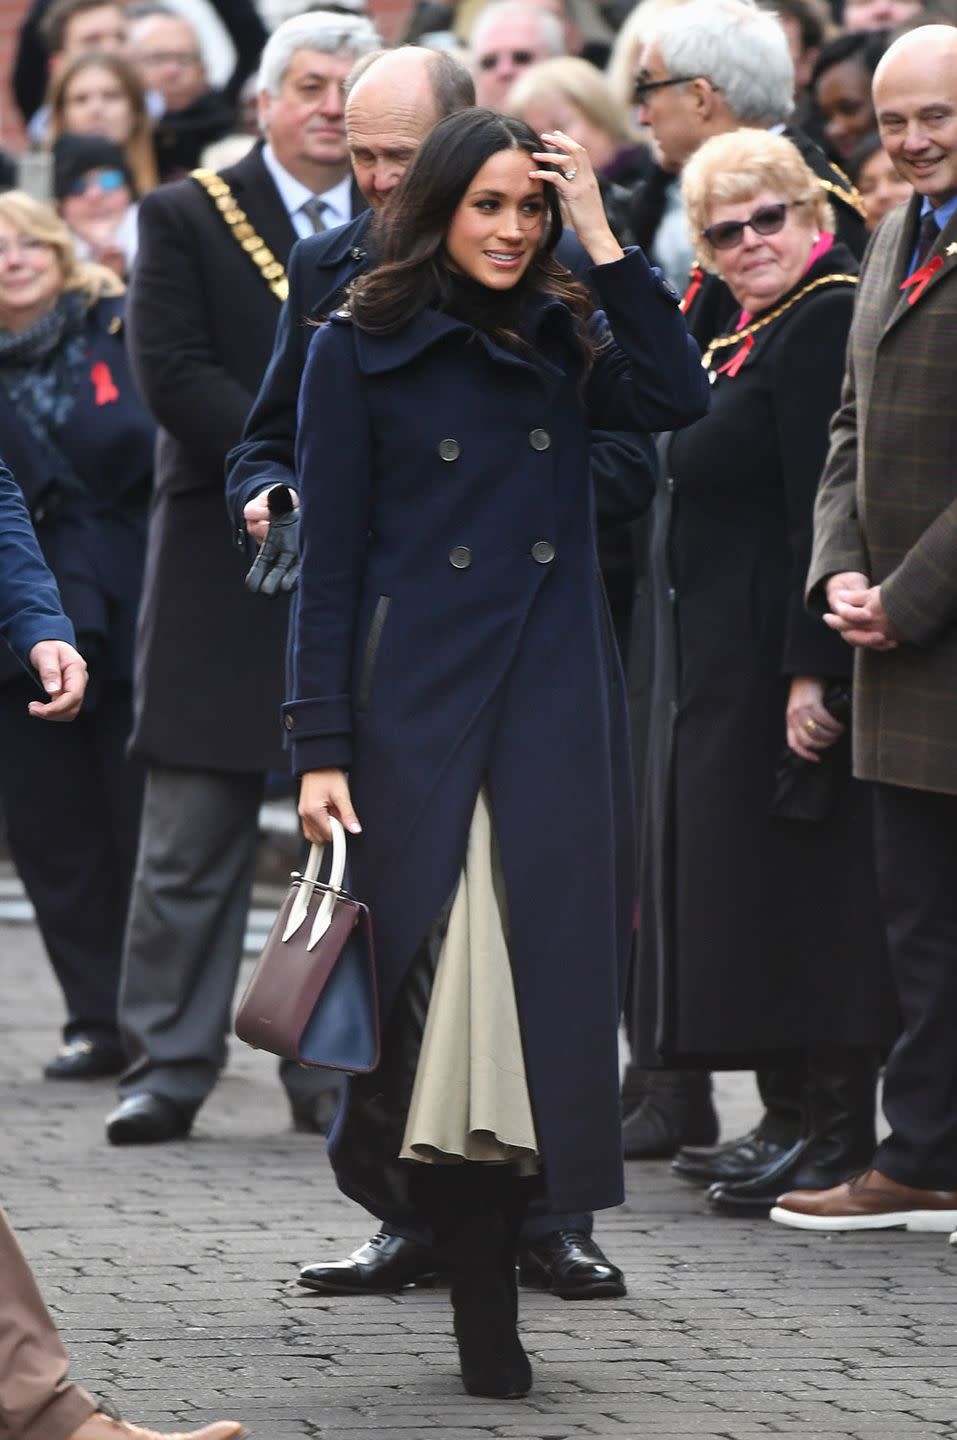 On her first official royal engagement in Nottingham, 2017